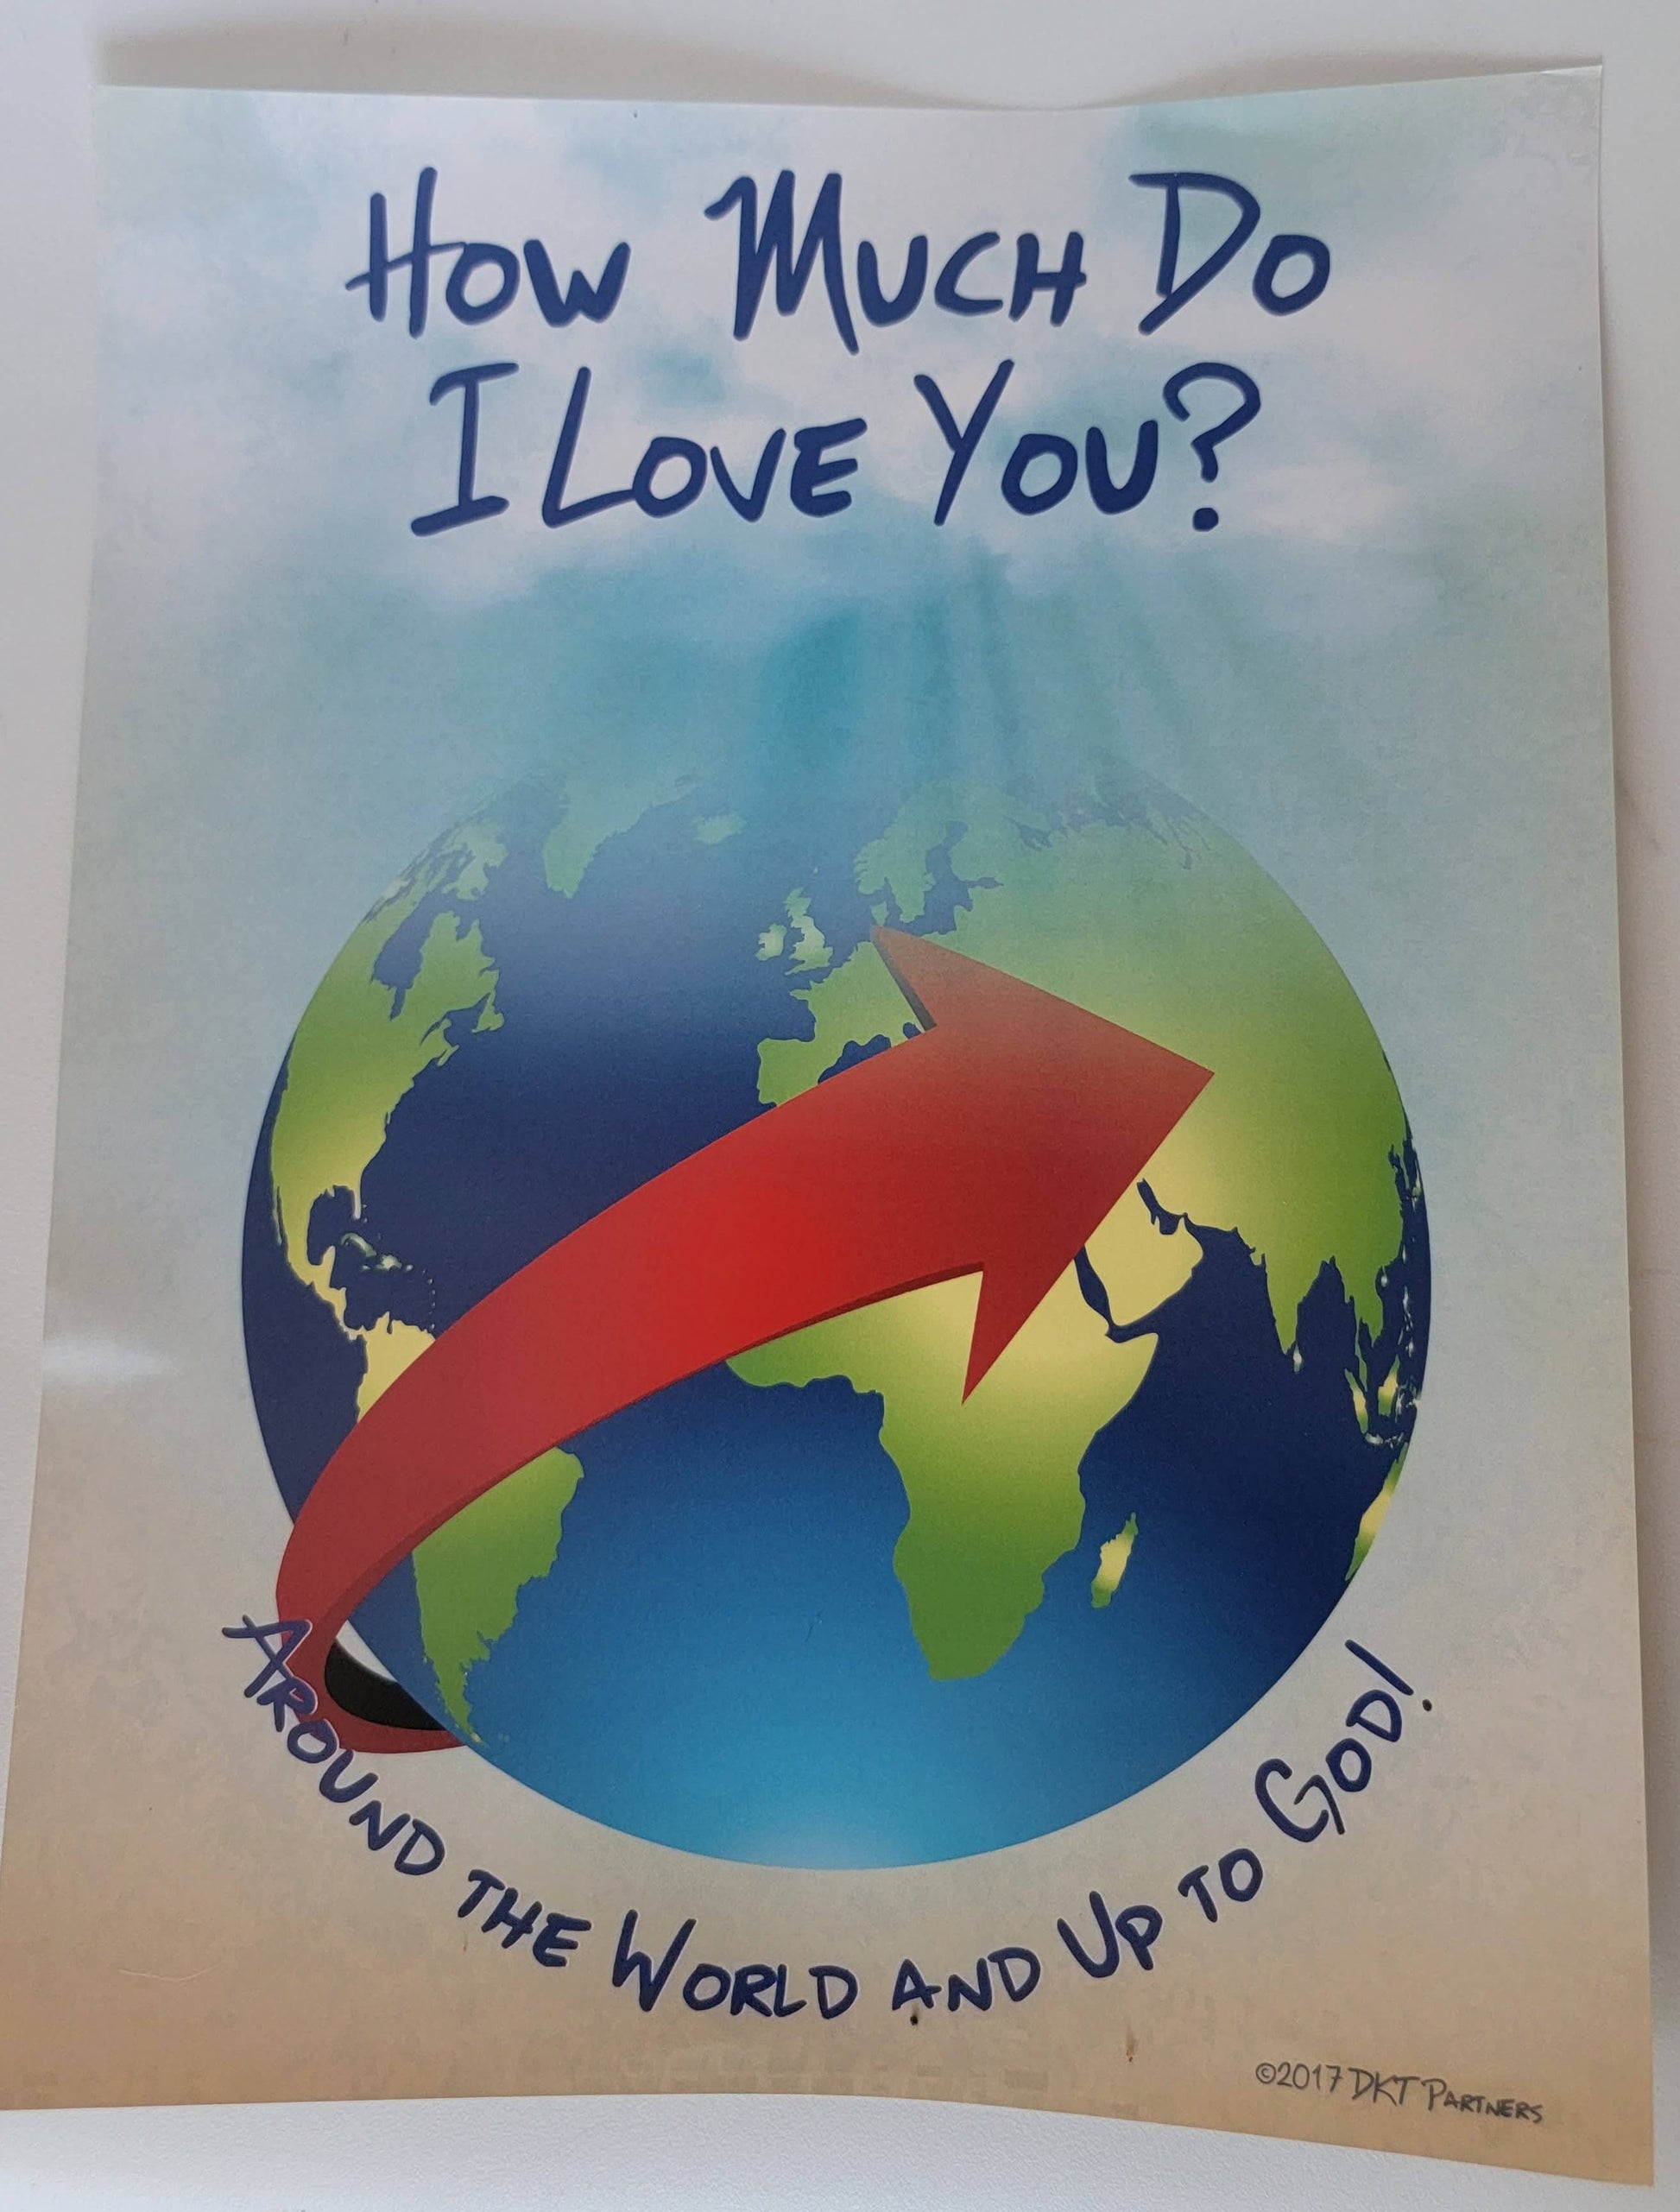 Poster that says "How Much Do I Love You?"